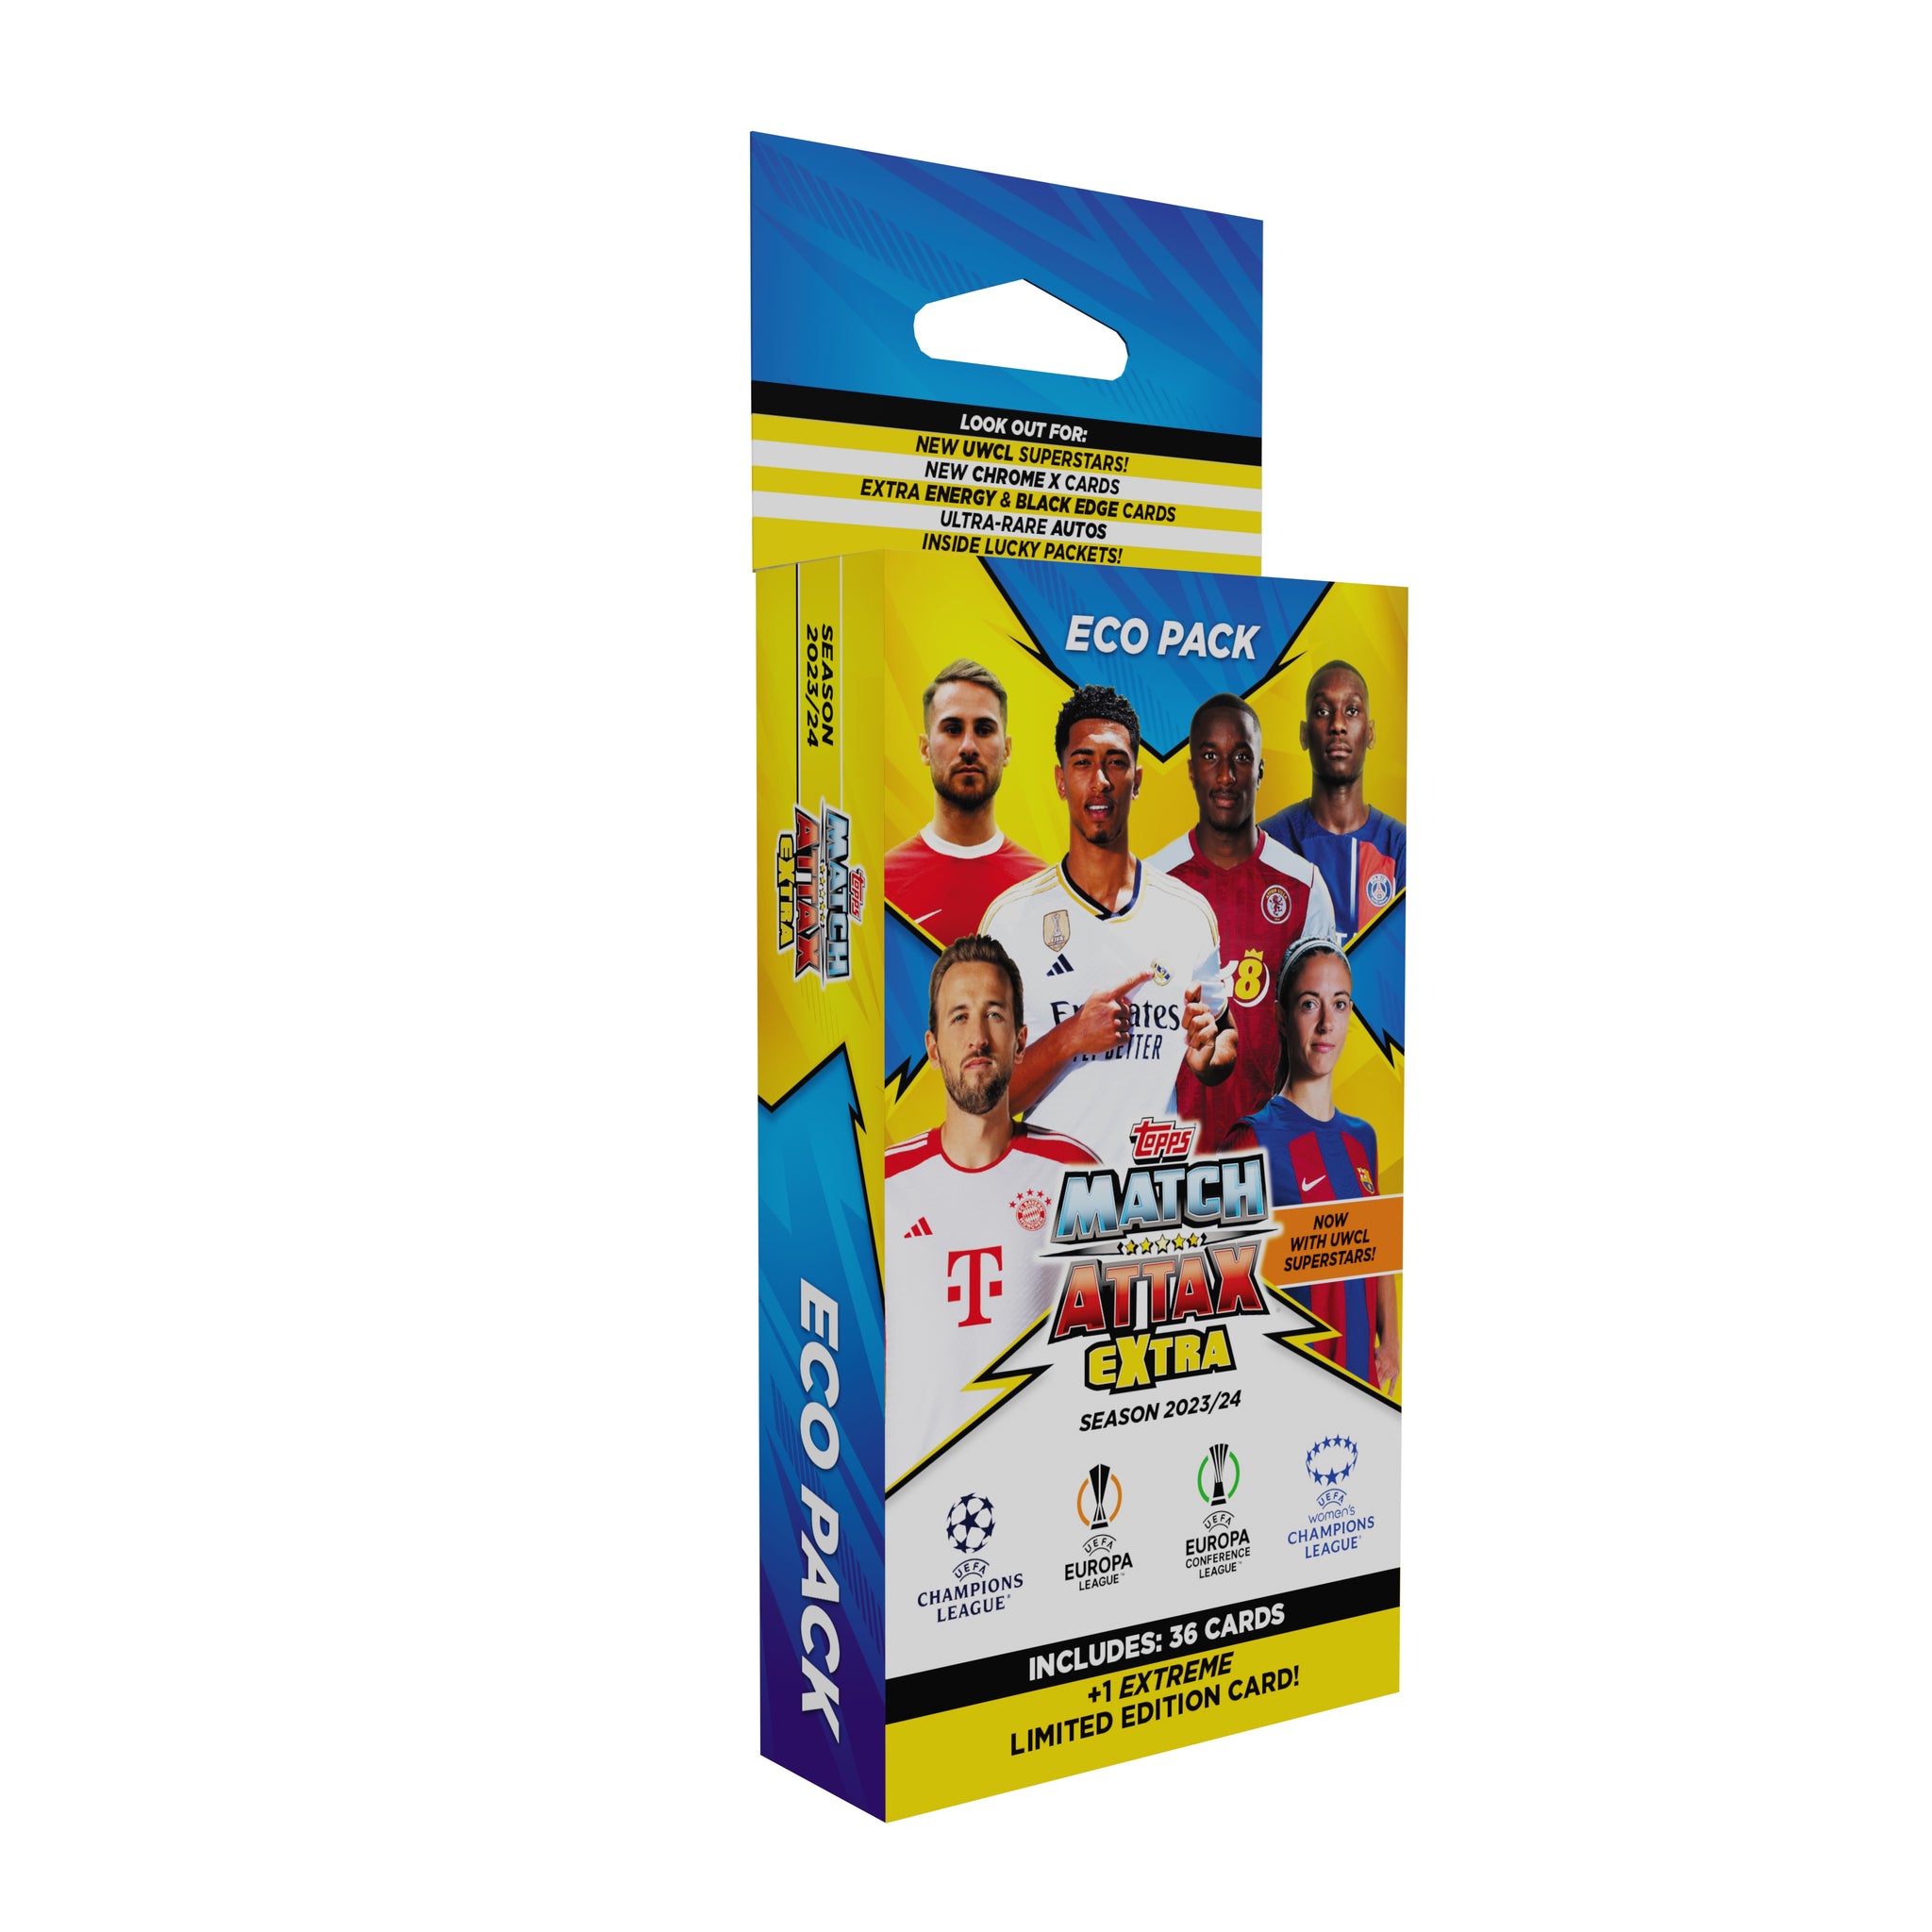 2023-24 TOPPS MATCH ATTAX EXTRA CHAMPIONS LEAGUE CARDS - ECO BLASTER (36 CARDS + LE GOLD) (IN STOCK MAR 8)